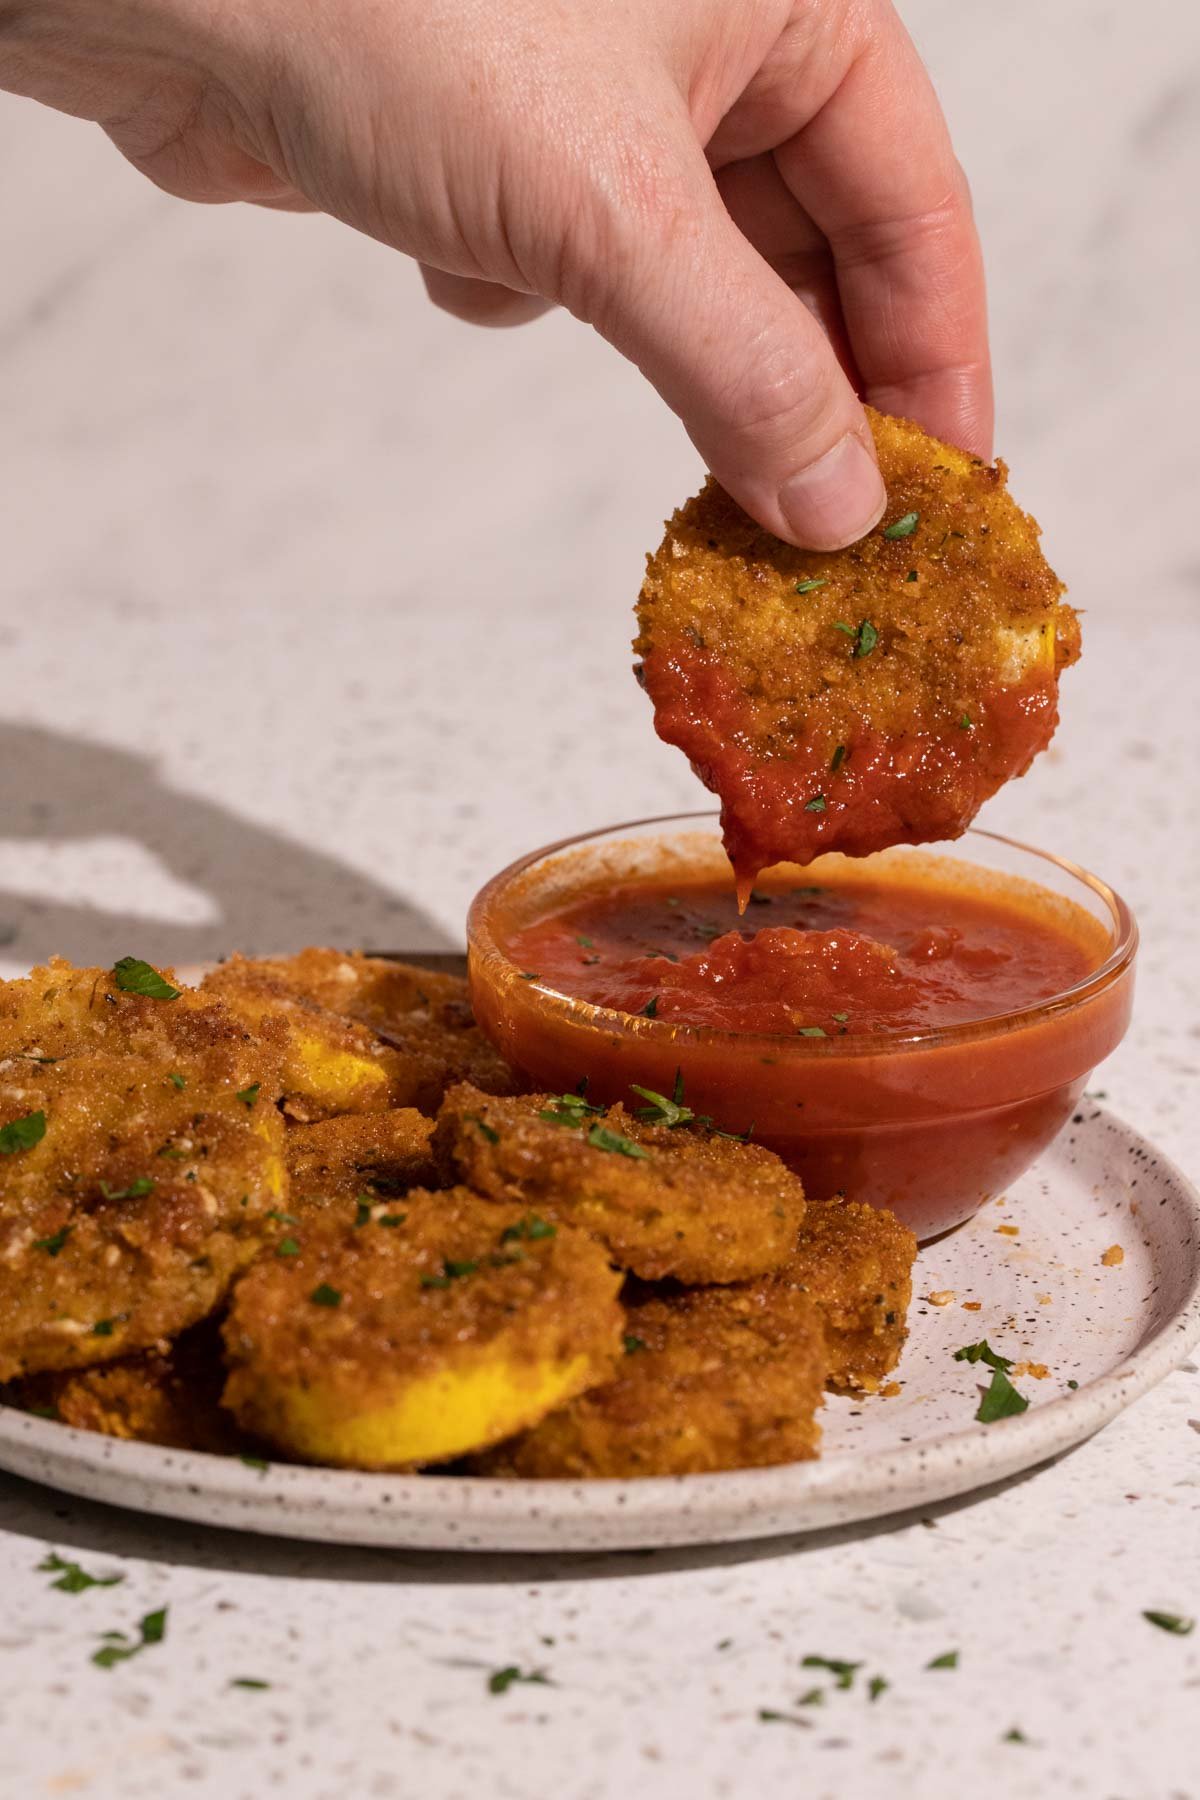 A hand dipping a piece of fried yellow squash in marinara sauce